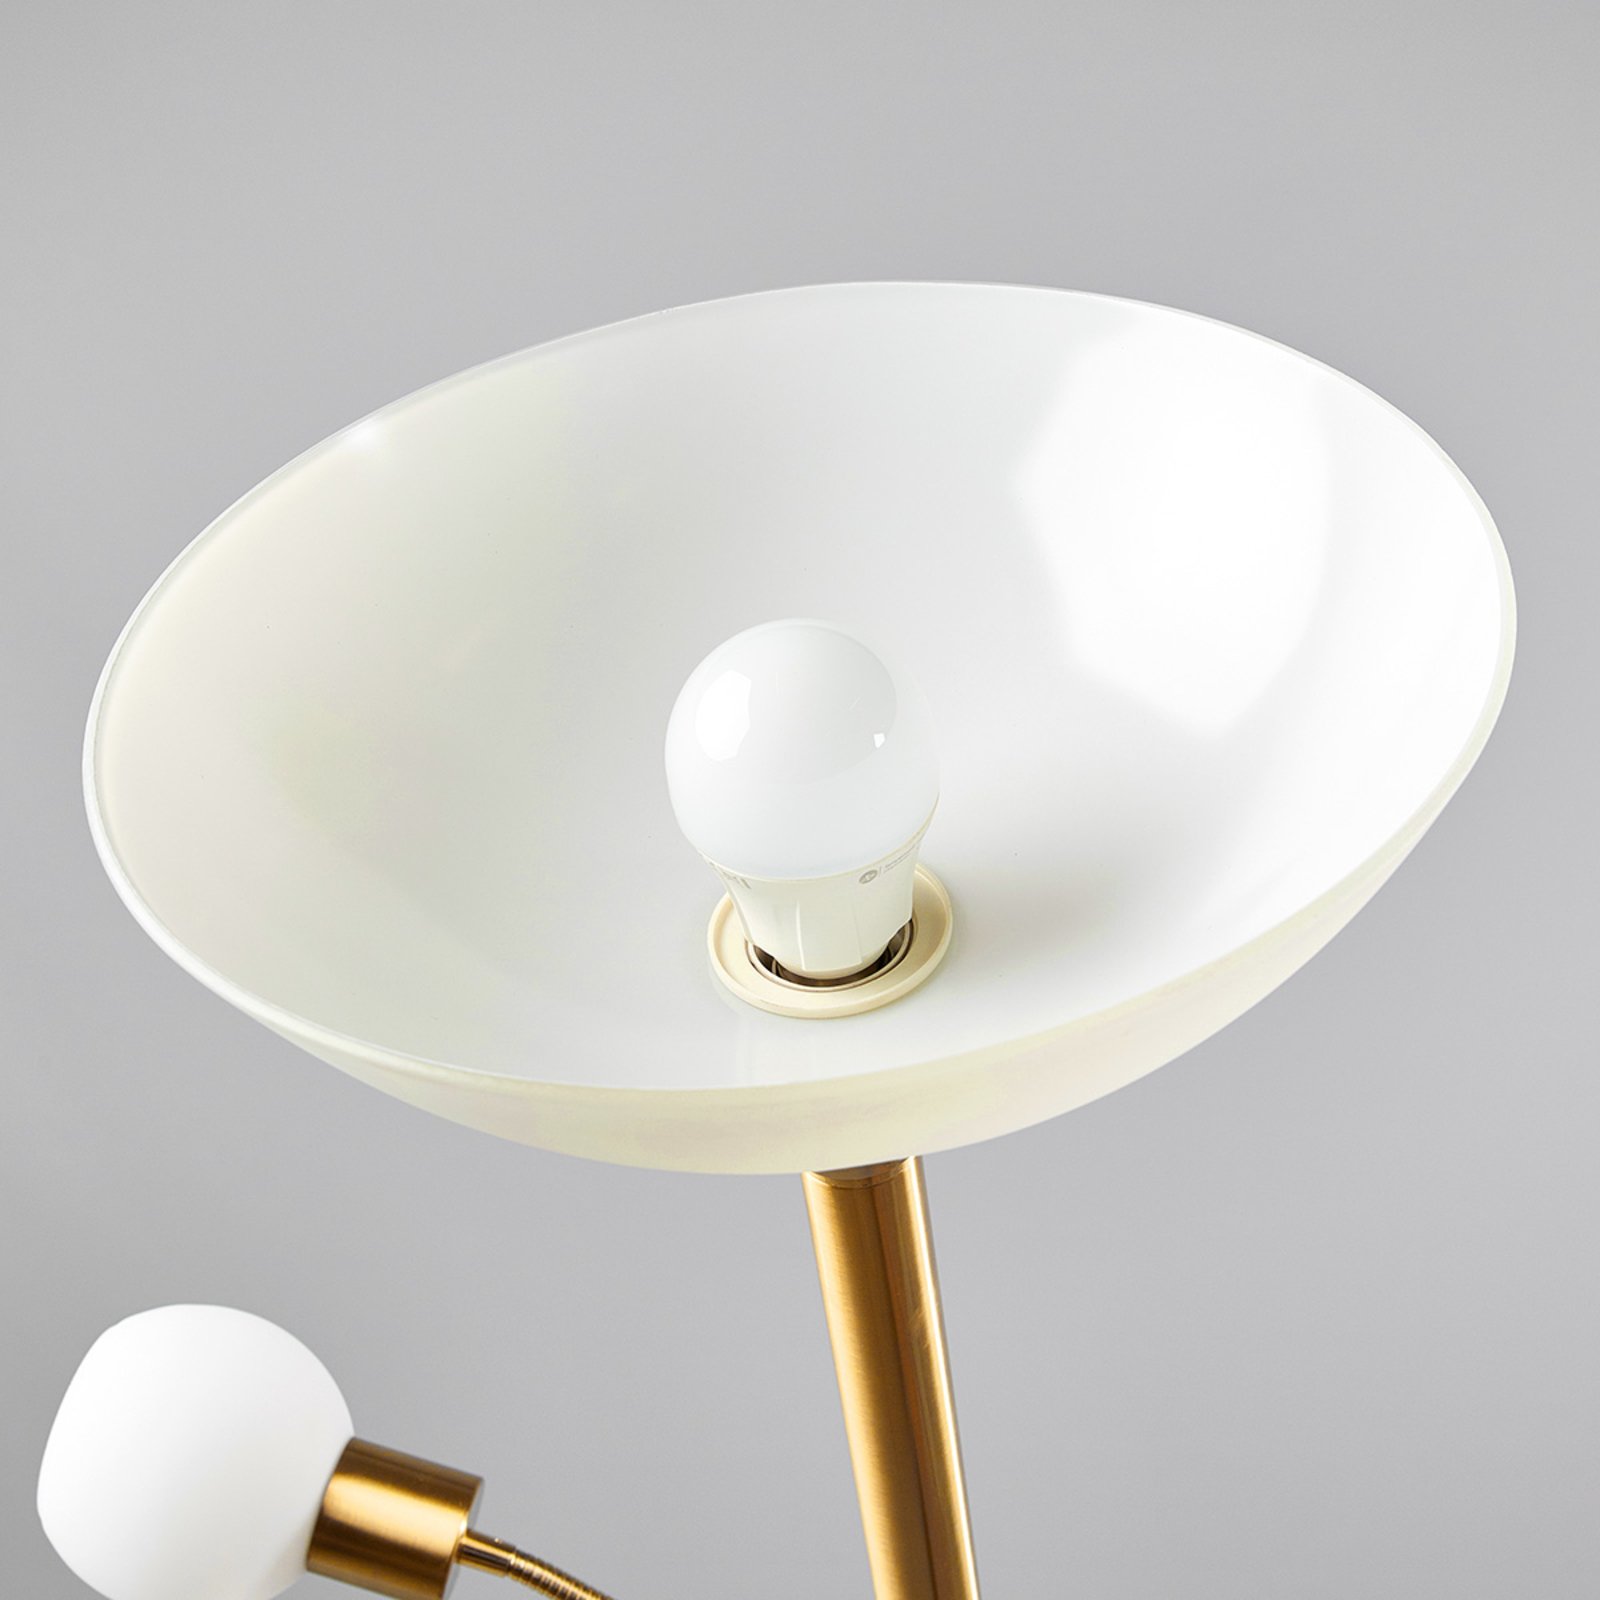 Elaina uplighter with a reading light, brass